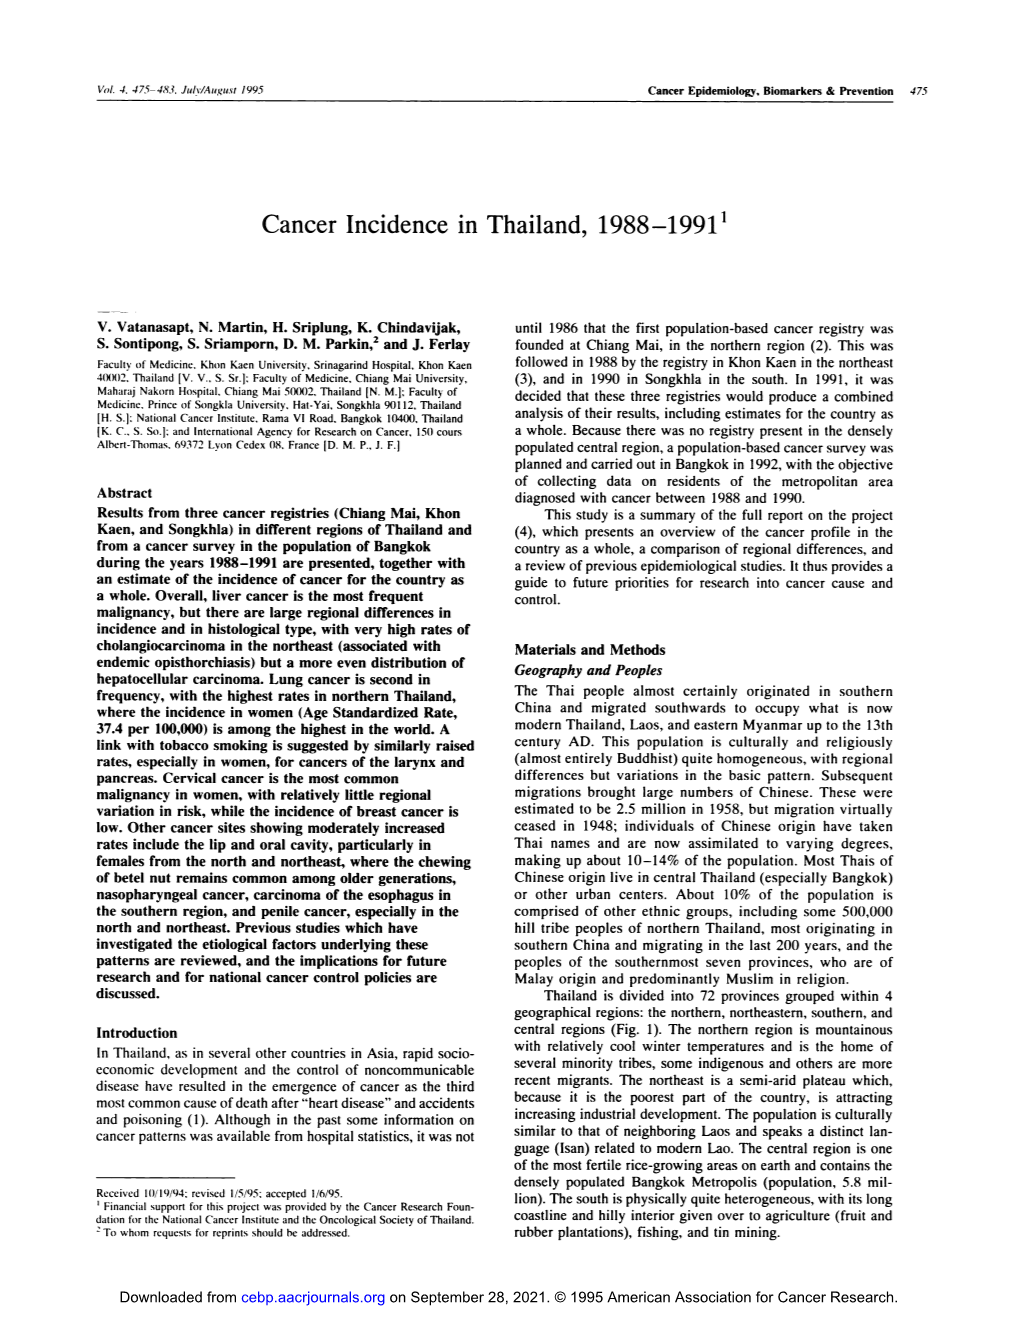 Cancer Incidence in Thailand, 1988 19911